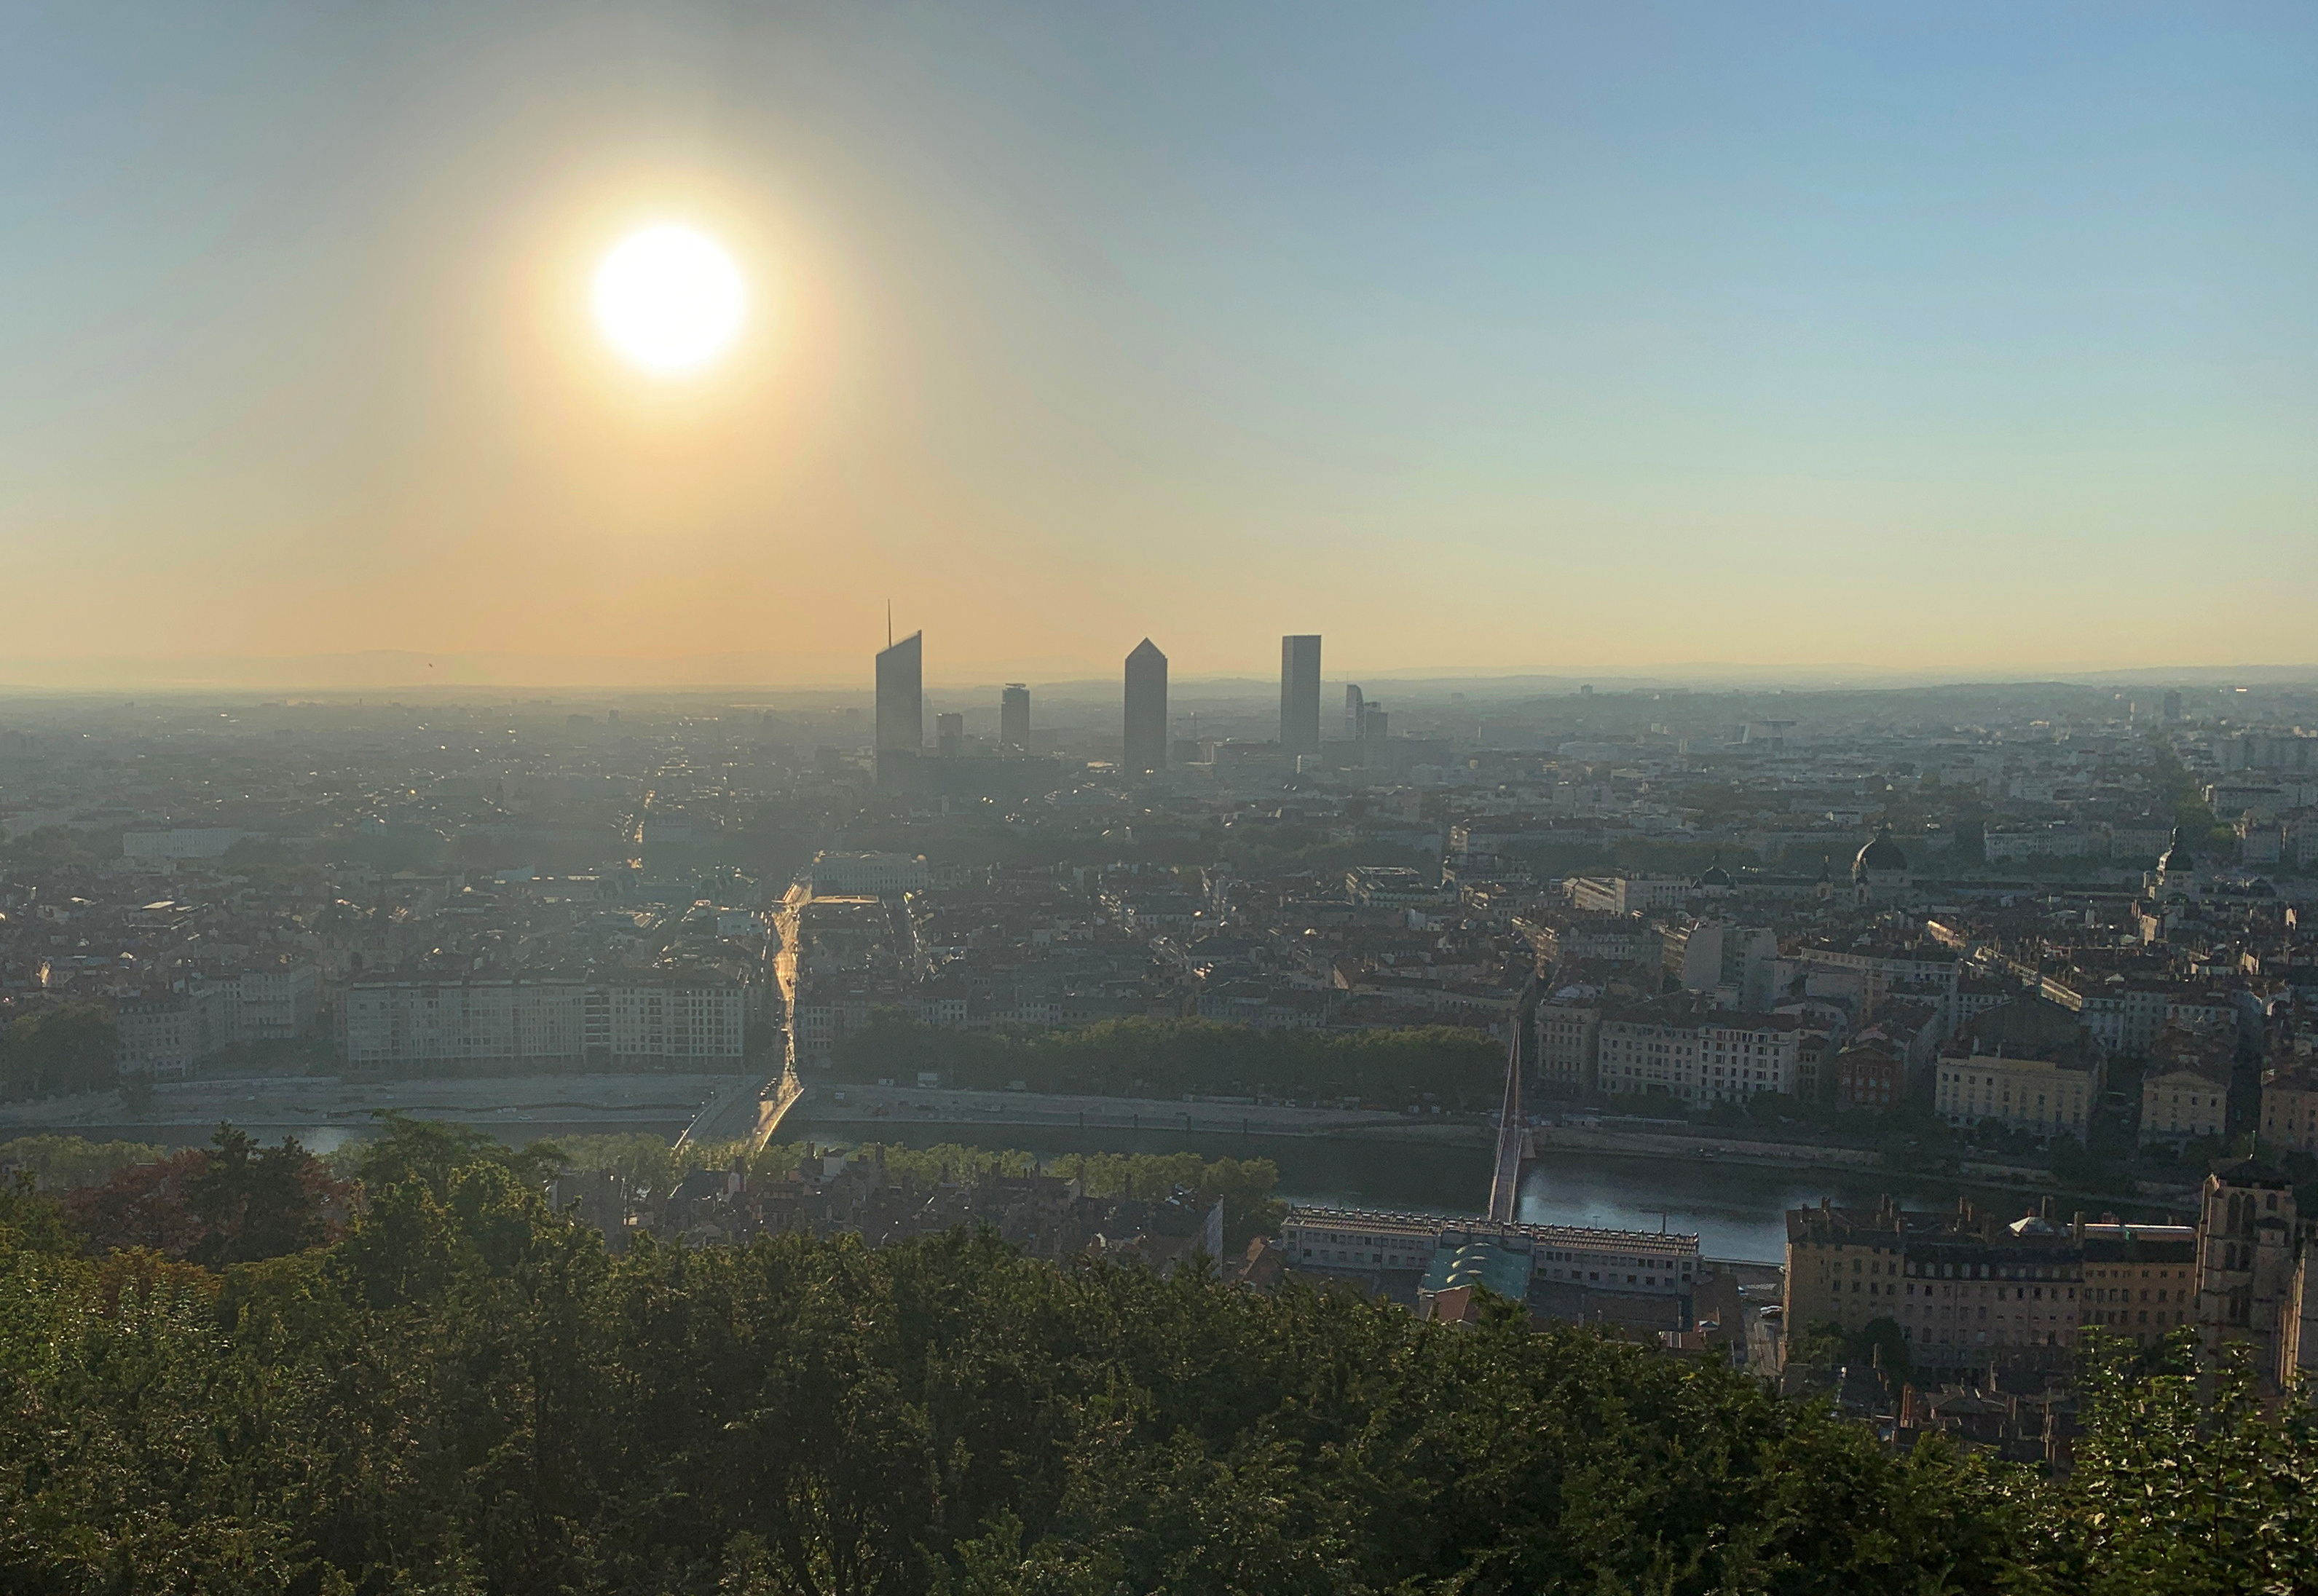 France hit by heat wave with record temperatures expected